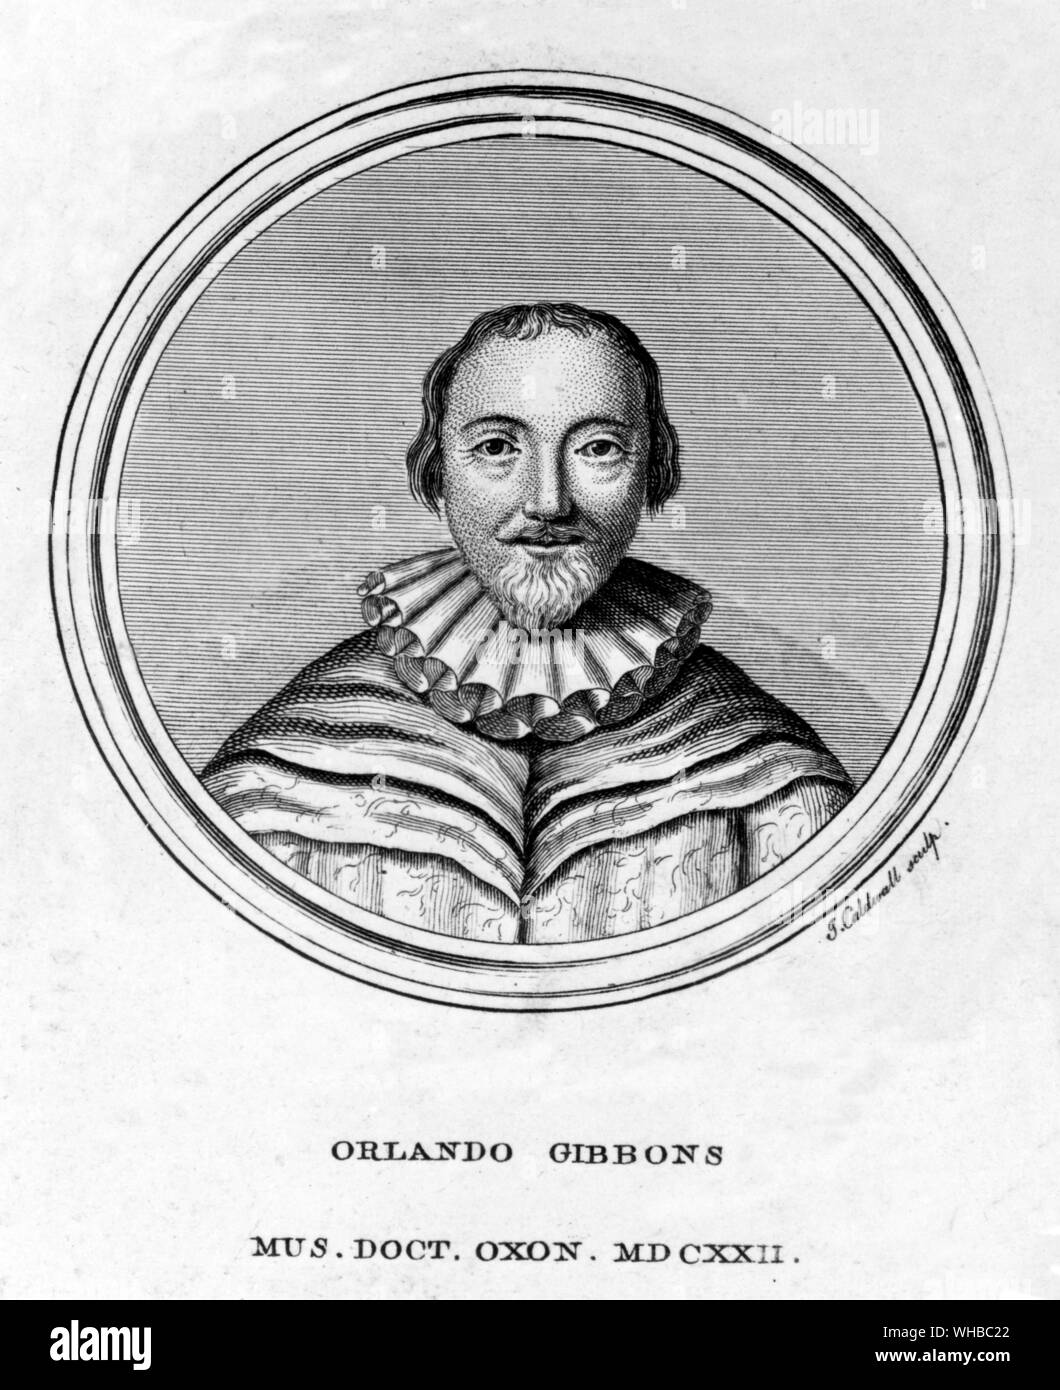 Orlando Gibbons (1583-1625) - Mus. Doct. Oxon. MDCXXII - Orlando Gibbons (baptised December 25, 1583 - June 5, 1625) was an English composer and organist of the late Tudor and early Jacobean periods. He was a leading composer in the England of his day.. Stock Photo